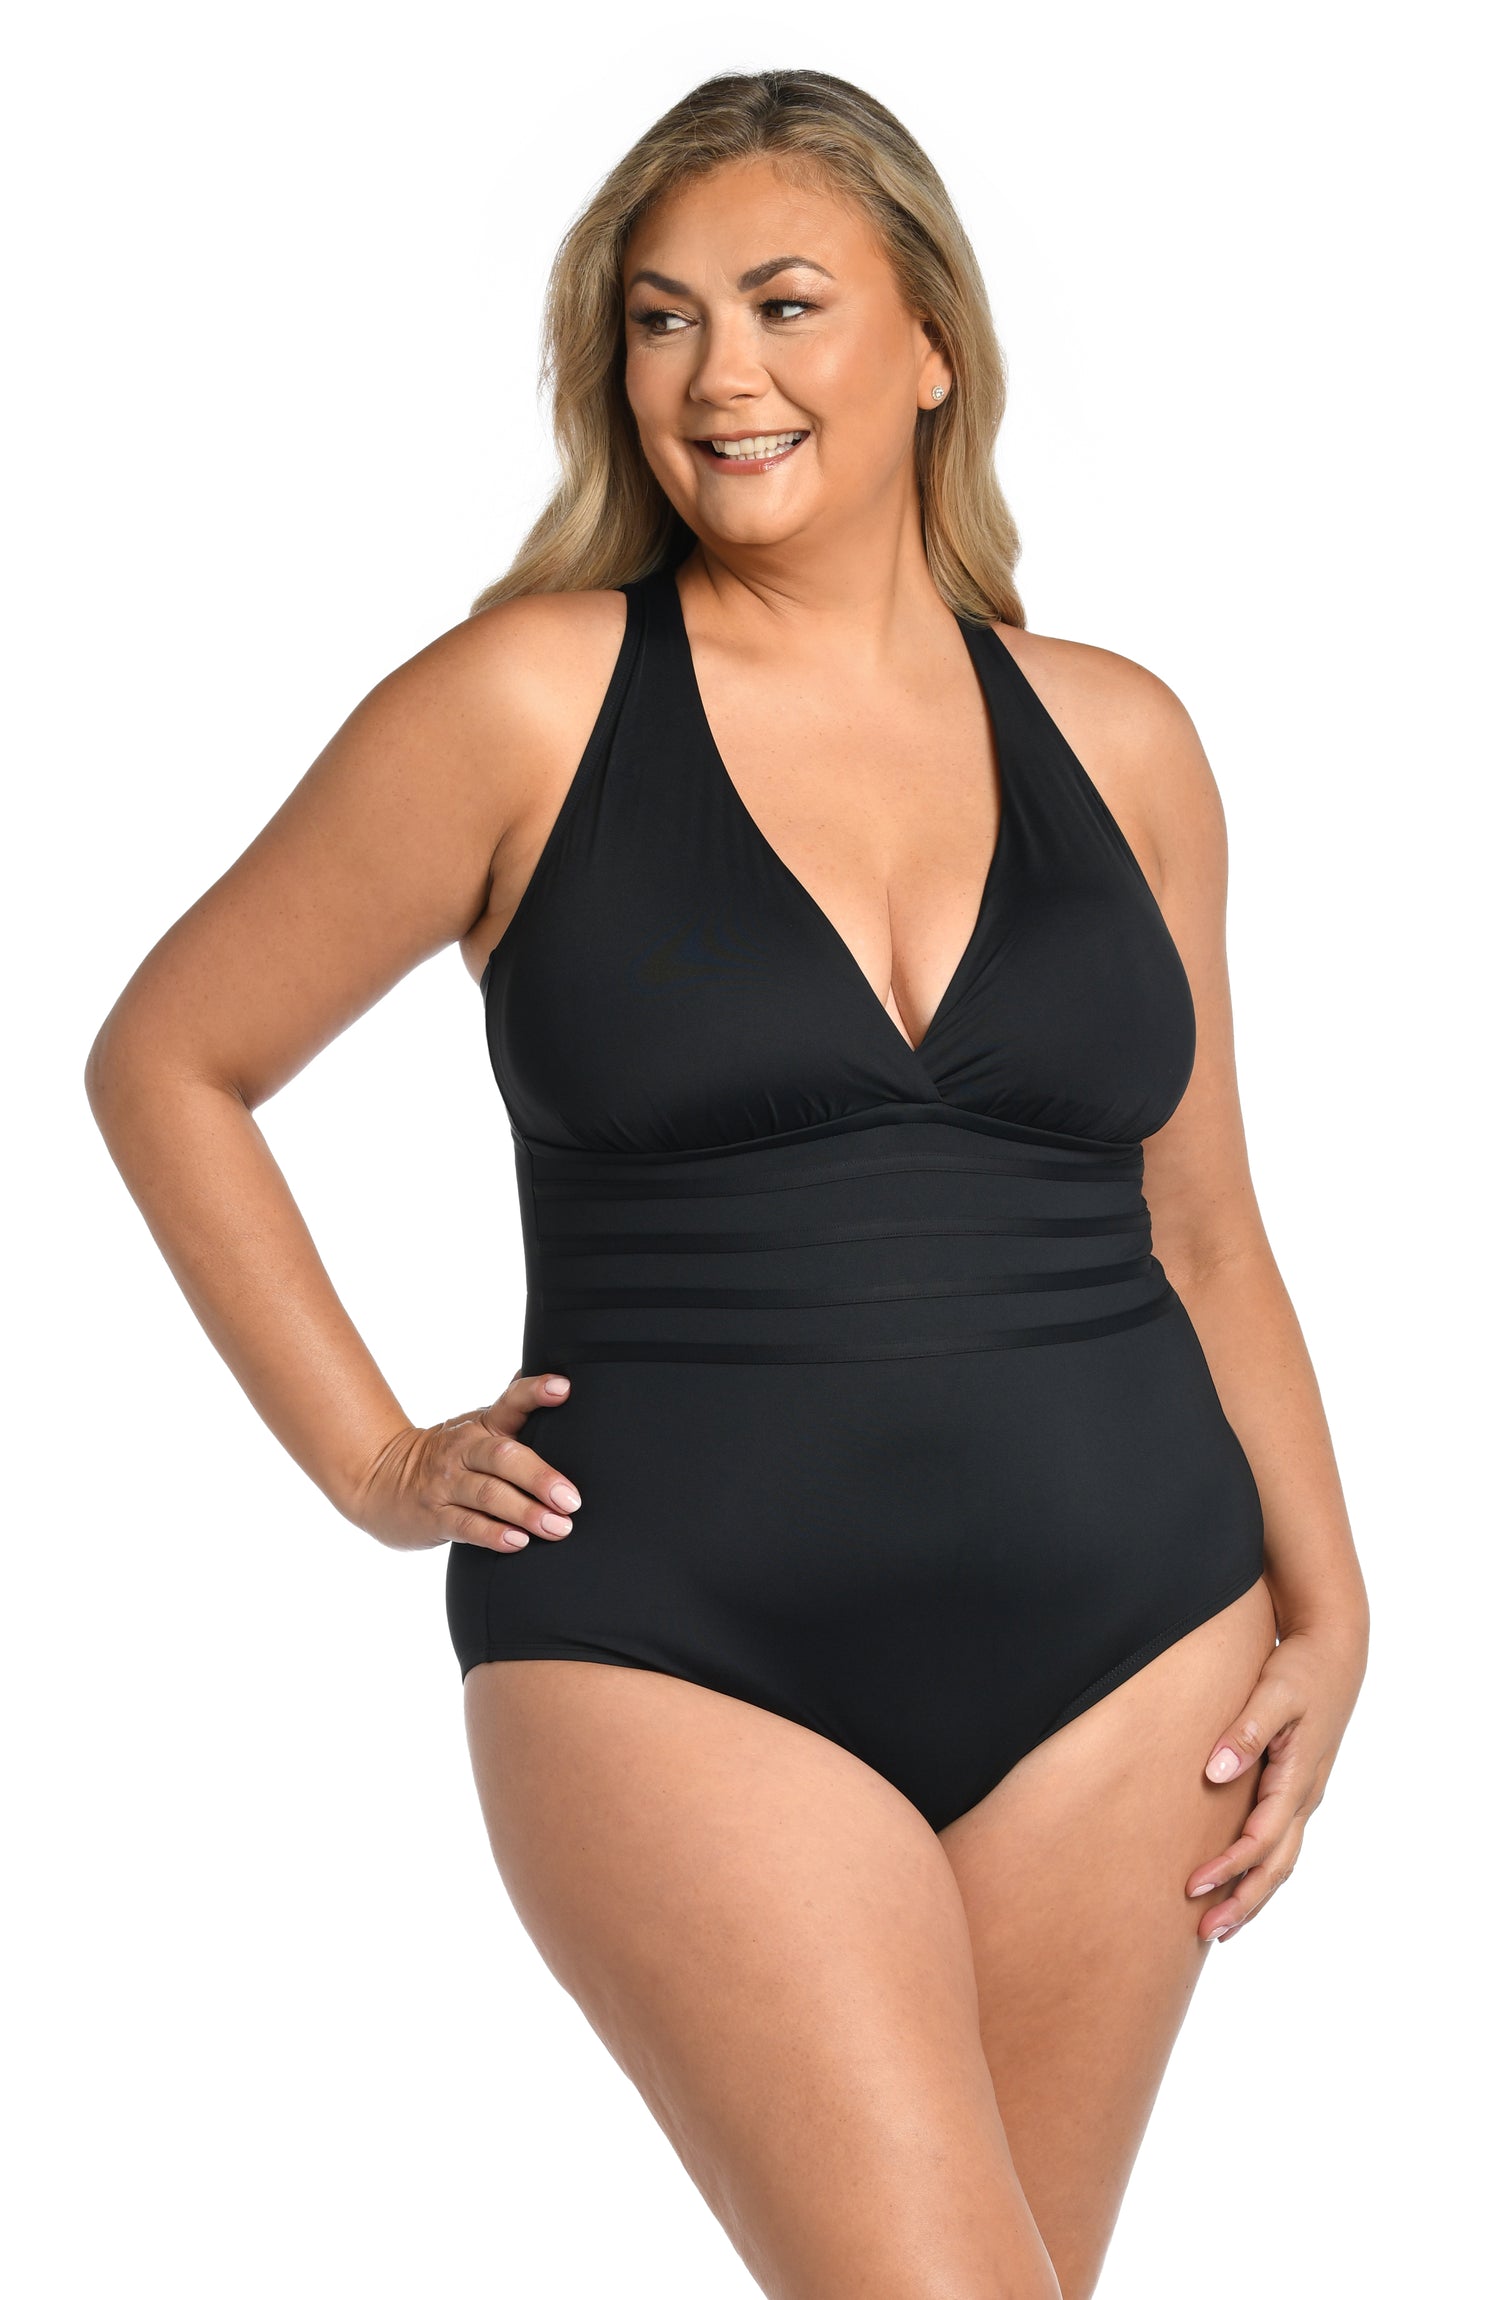 Tidal Wave Black Strappy Backless One-Piece Swimsuit